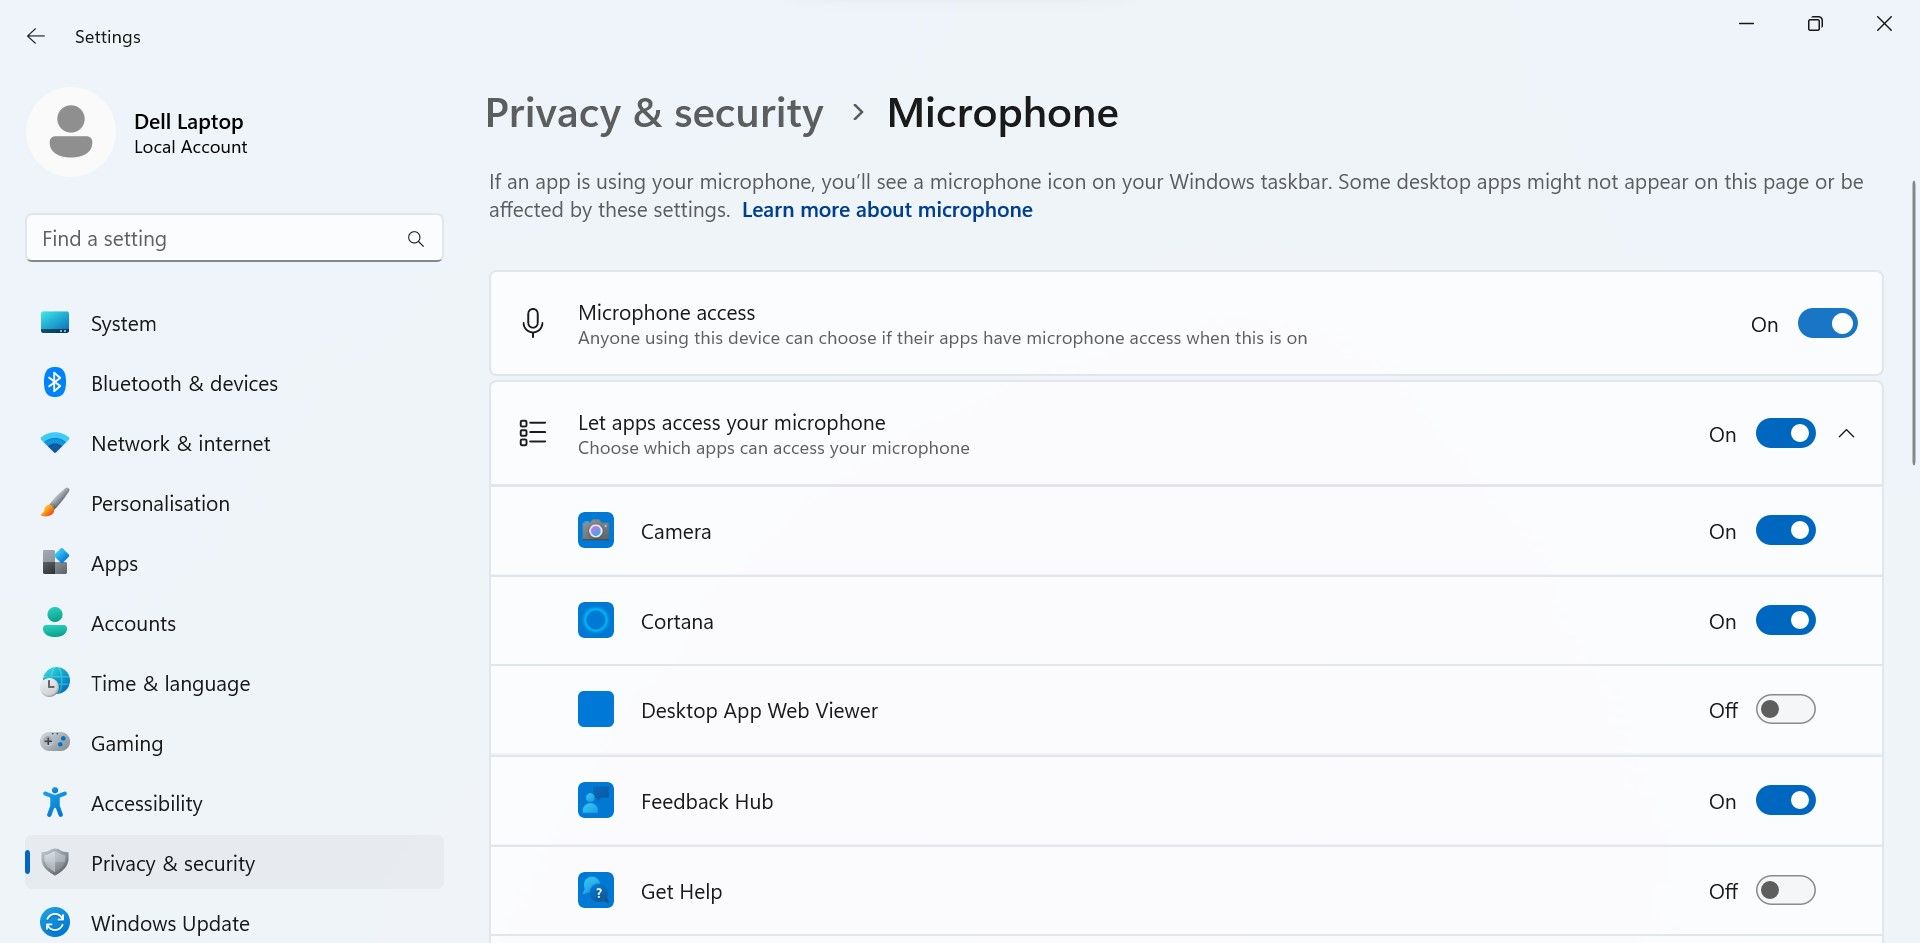 Turning on the Microphone Access in Windows Settings App